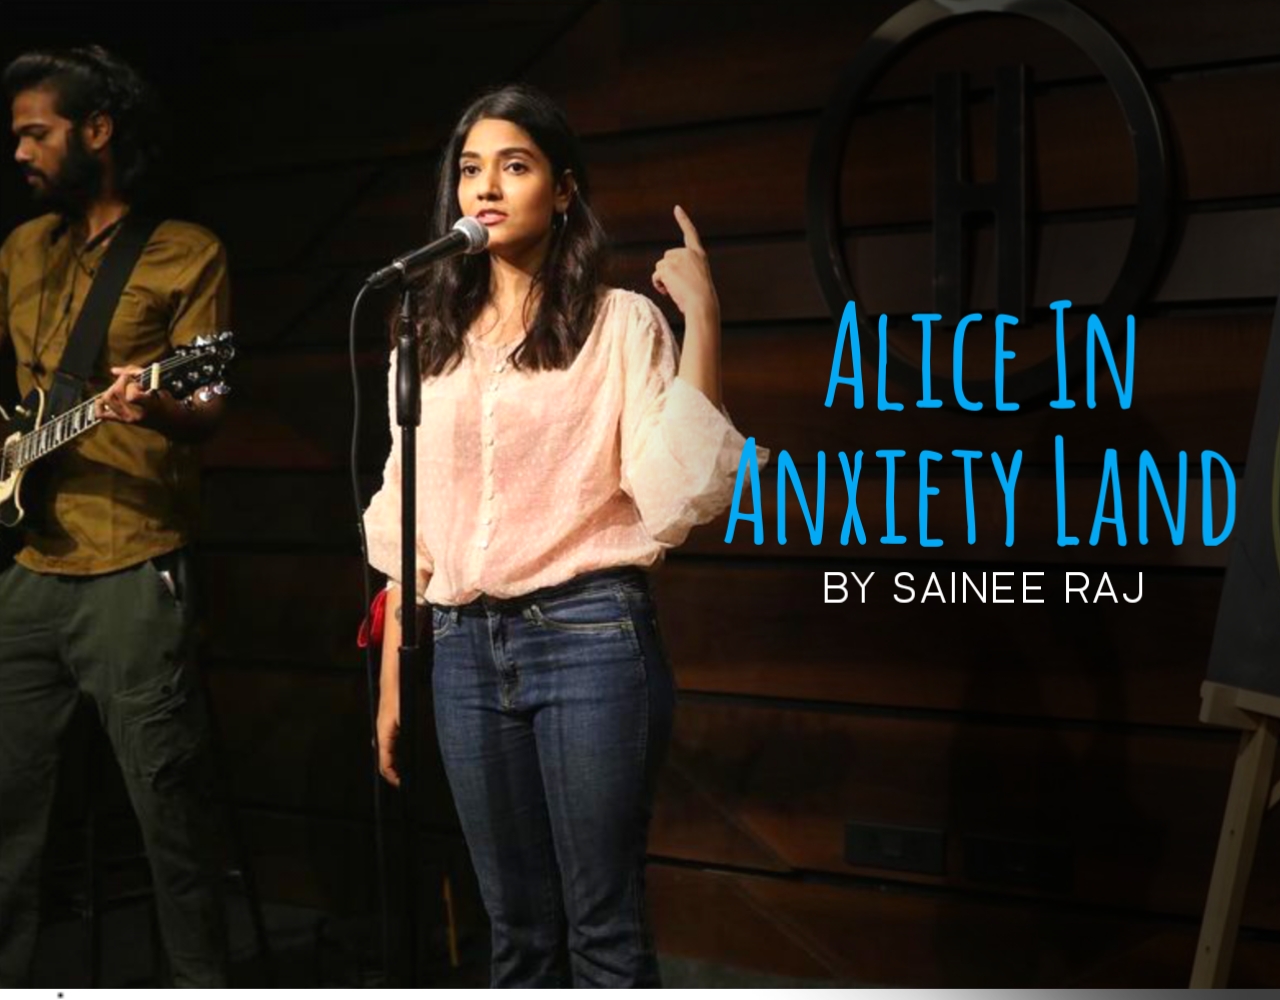 This Beautiful Poetry 'Alice In Anxiety Land' Has written and Performed by Sainee Raj.